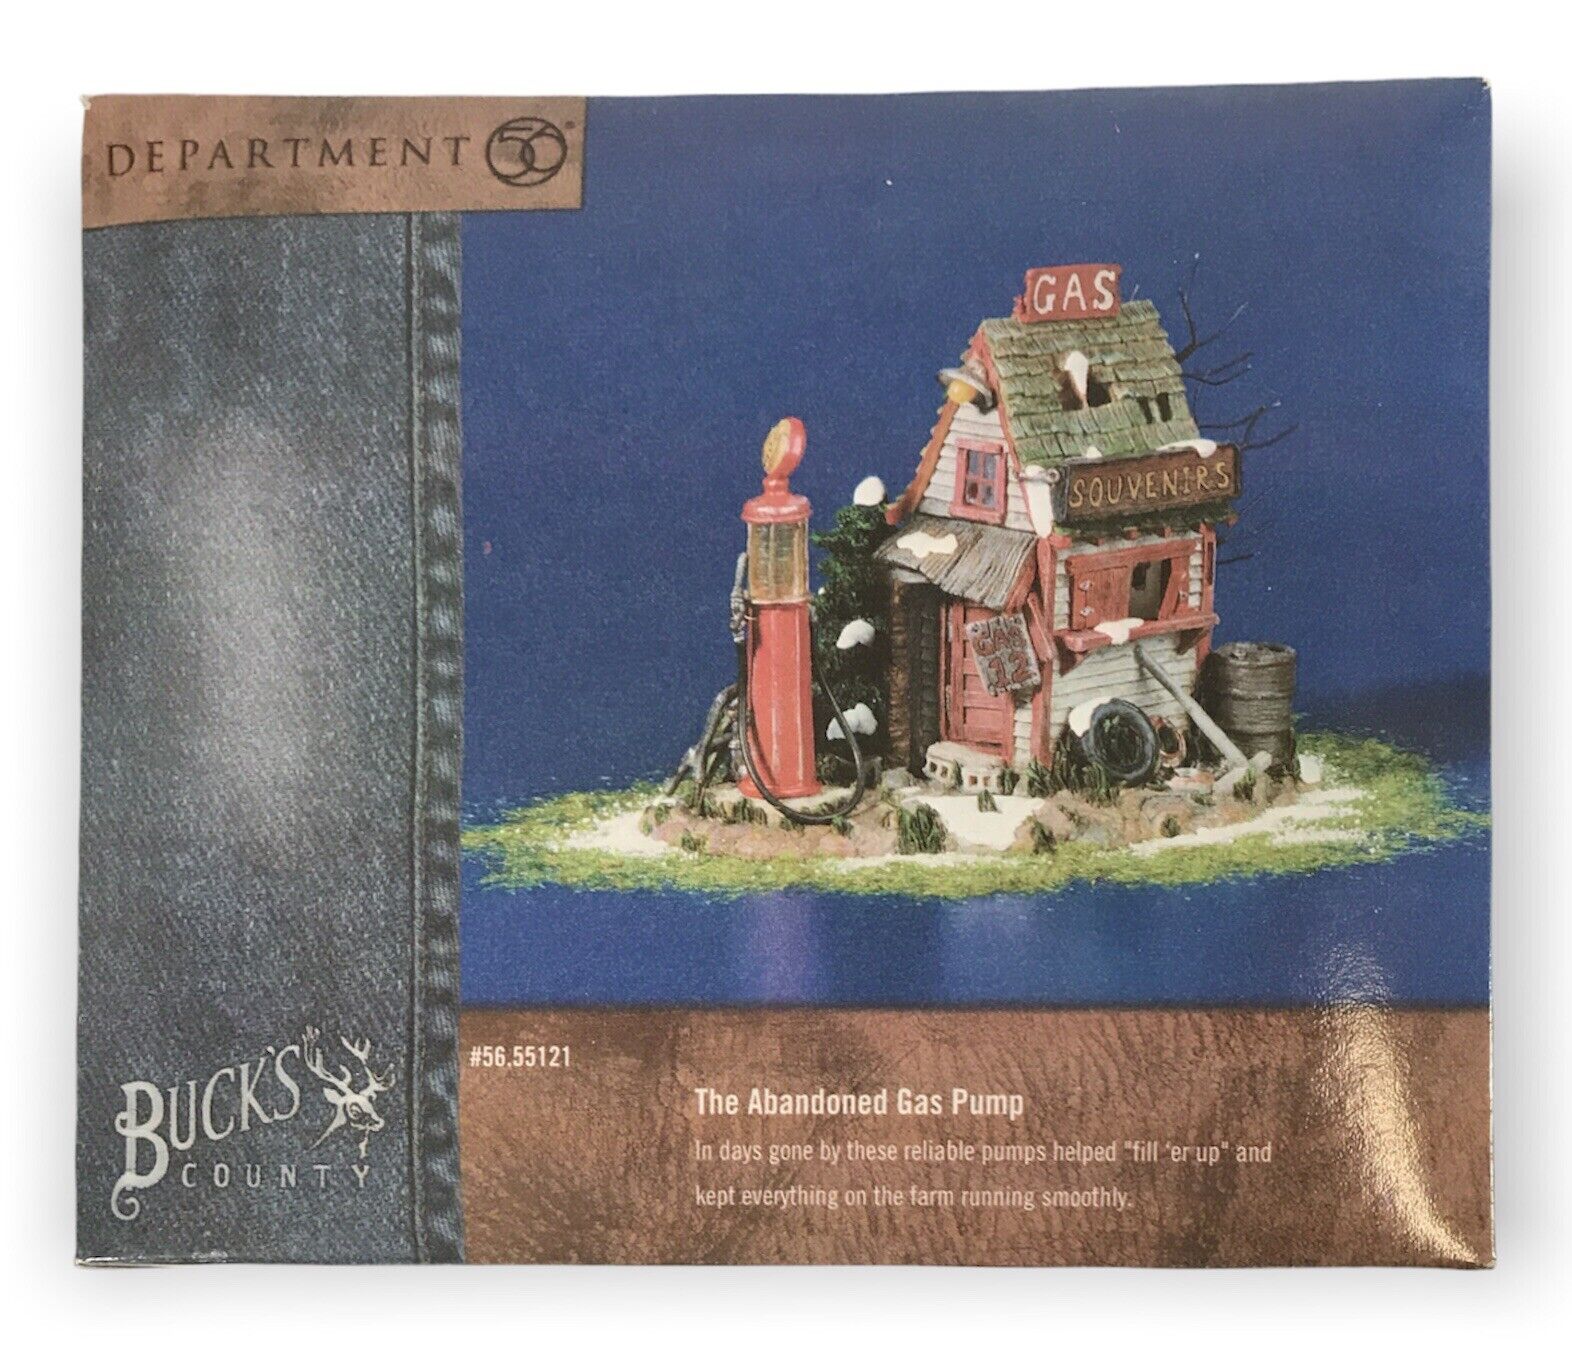 Department 56 "The Abandoned Gas Pump" Buck's County Collection NIB!